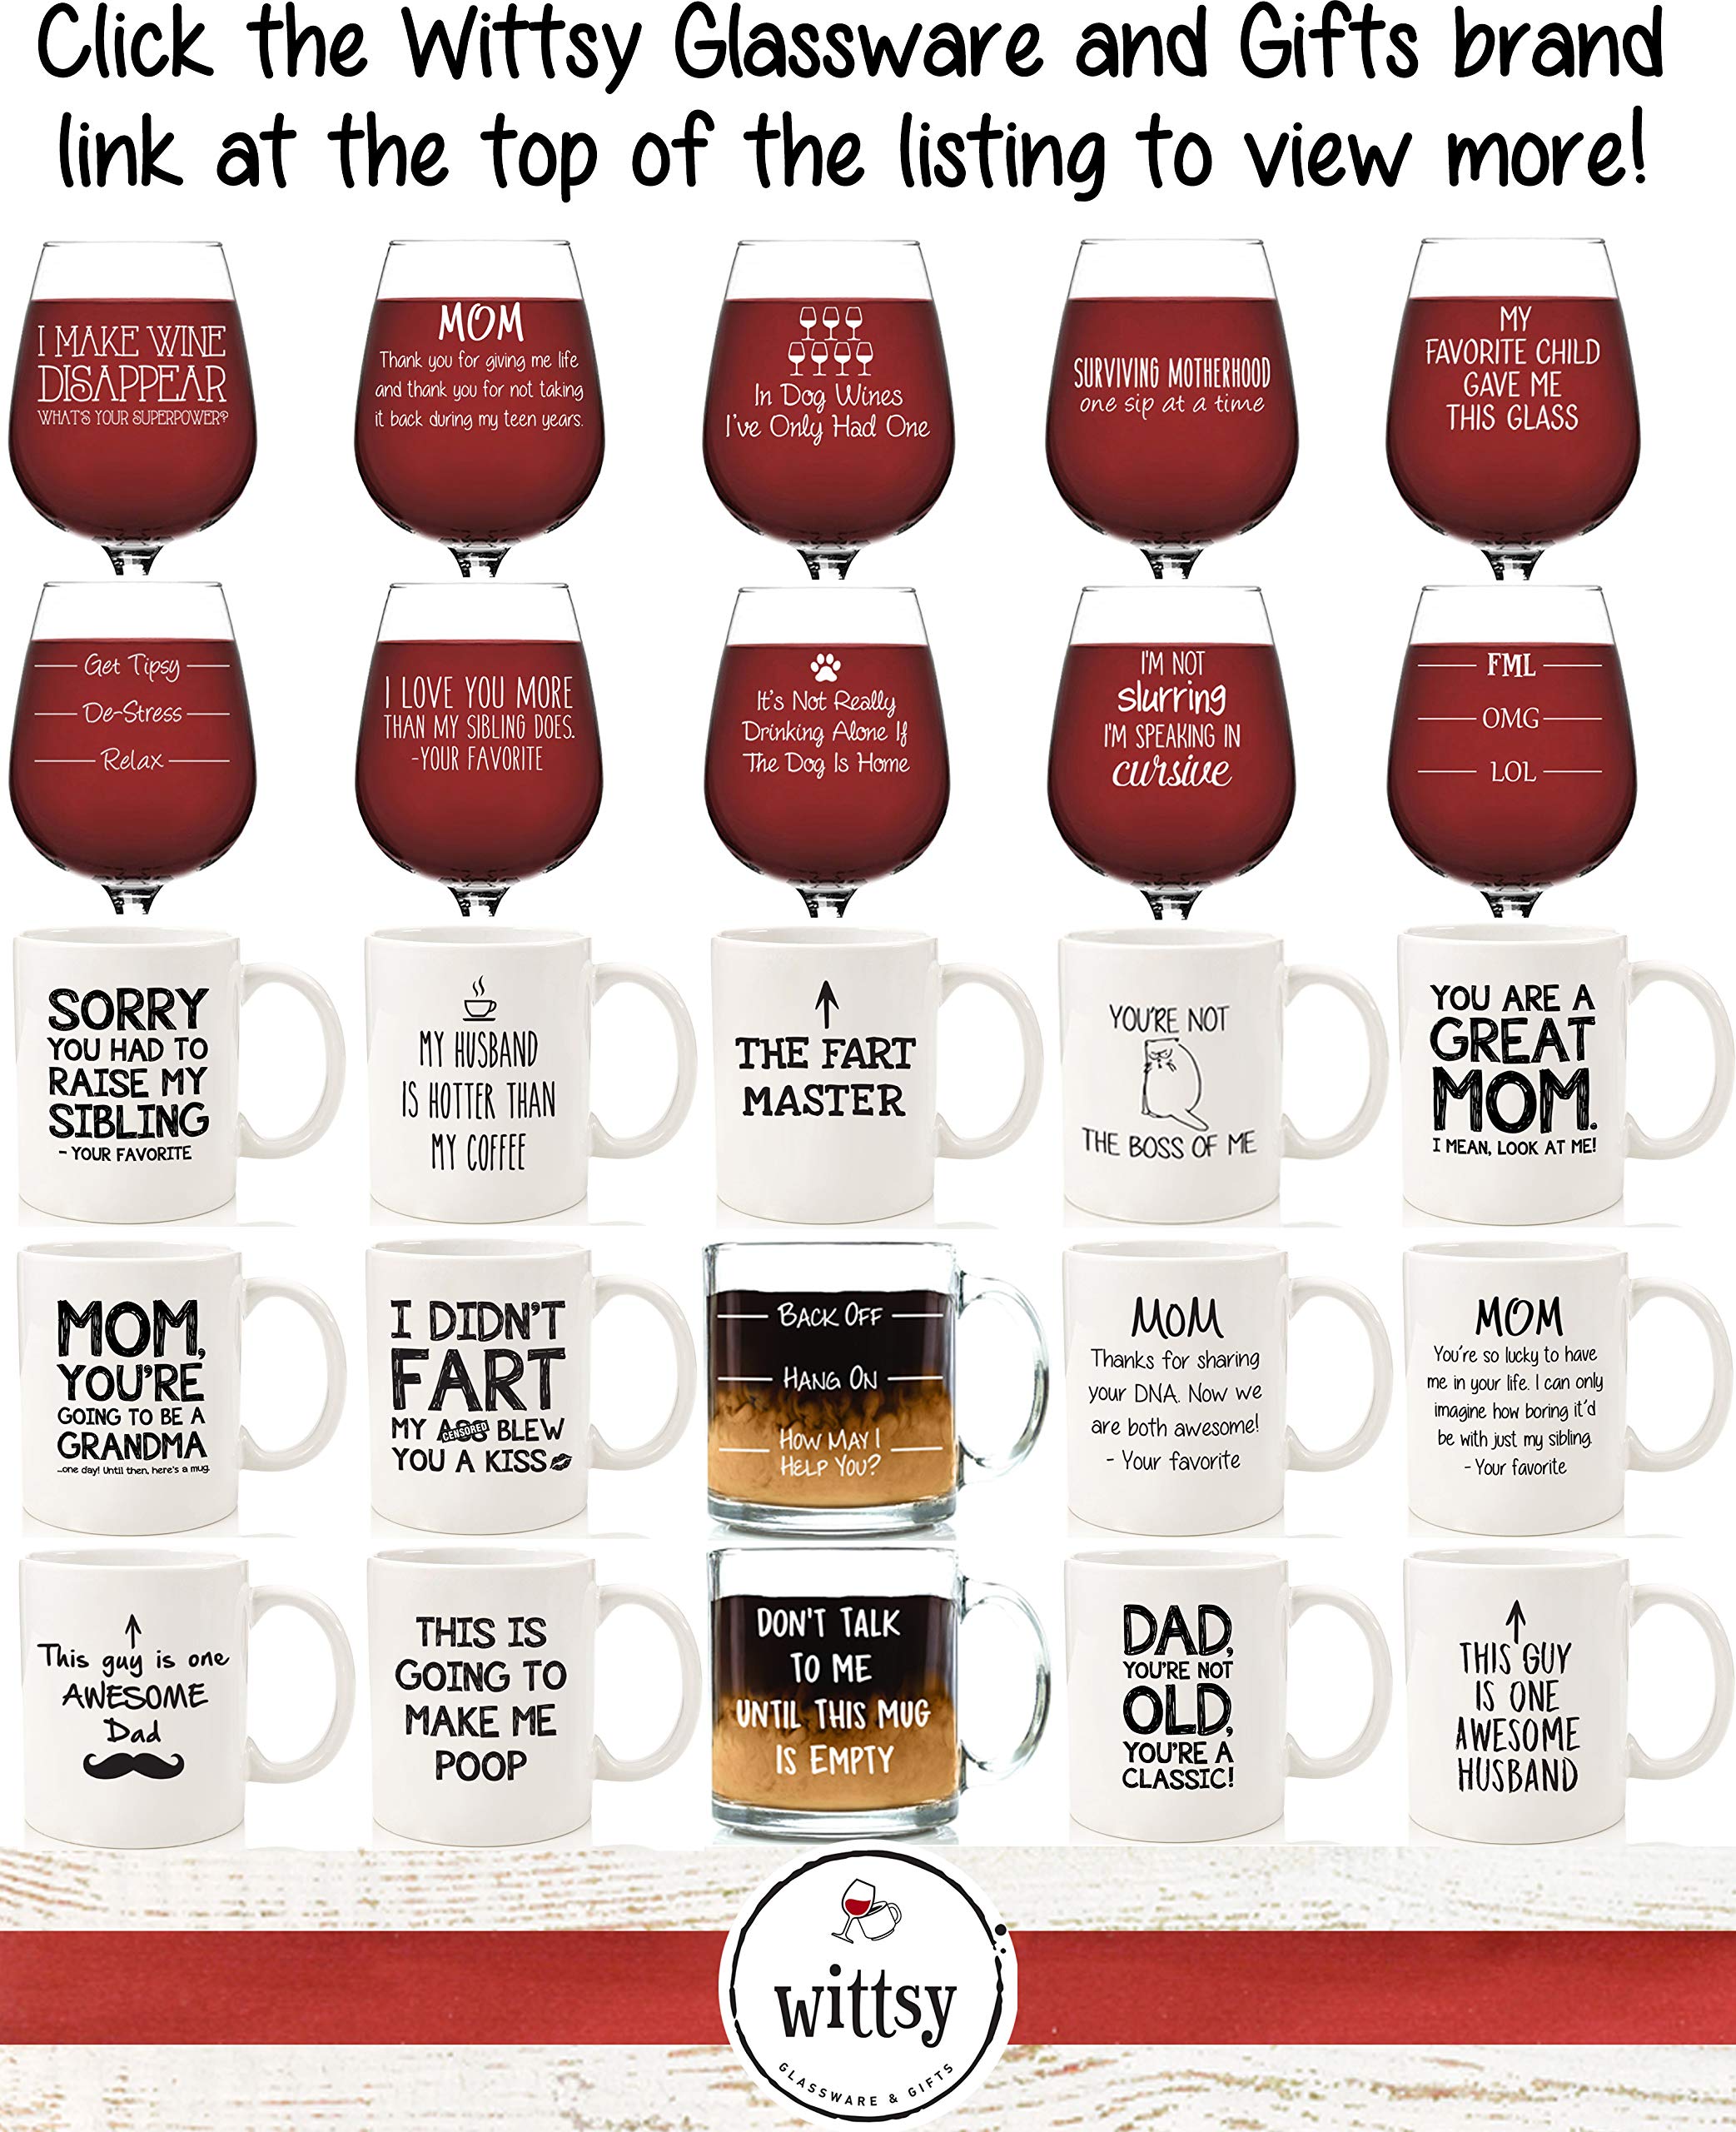 I Love You More, Your Favorite Child Funny Wine Glass - Best Mom & Dad Gifts - Gag Birthday Gifts for Mom, Women, Men from Daughter, Son - Birthday Present Ideas for Parents - Fun Novelty Gift